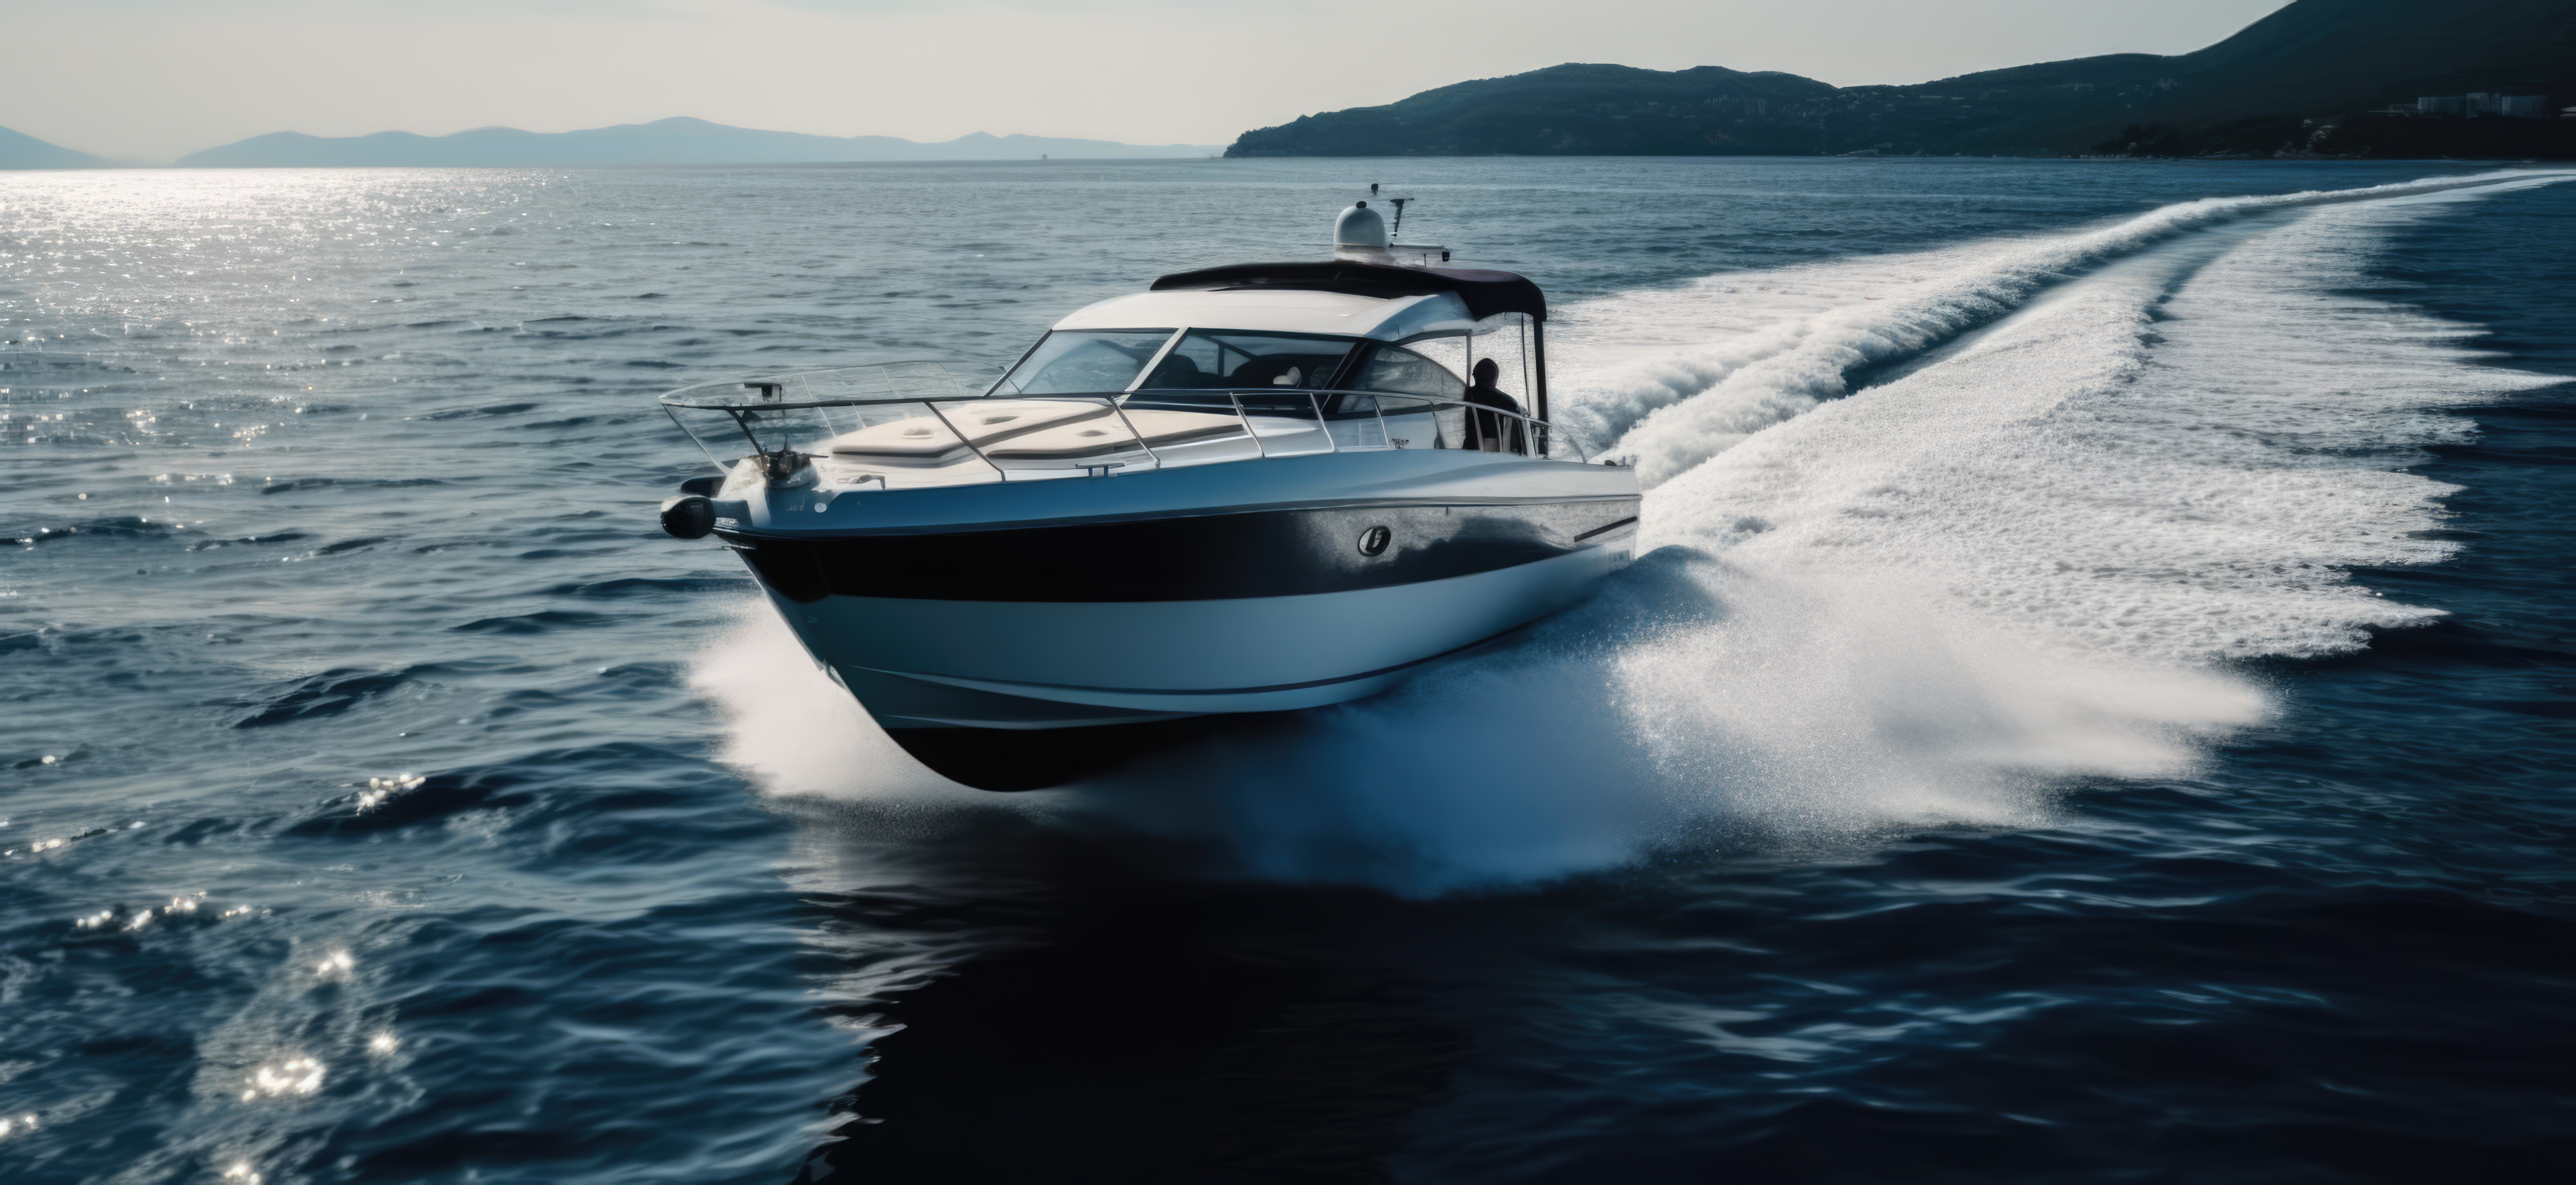 10 Common Boating Questions and the Answers